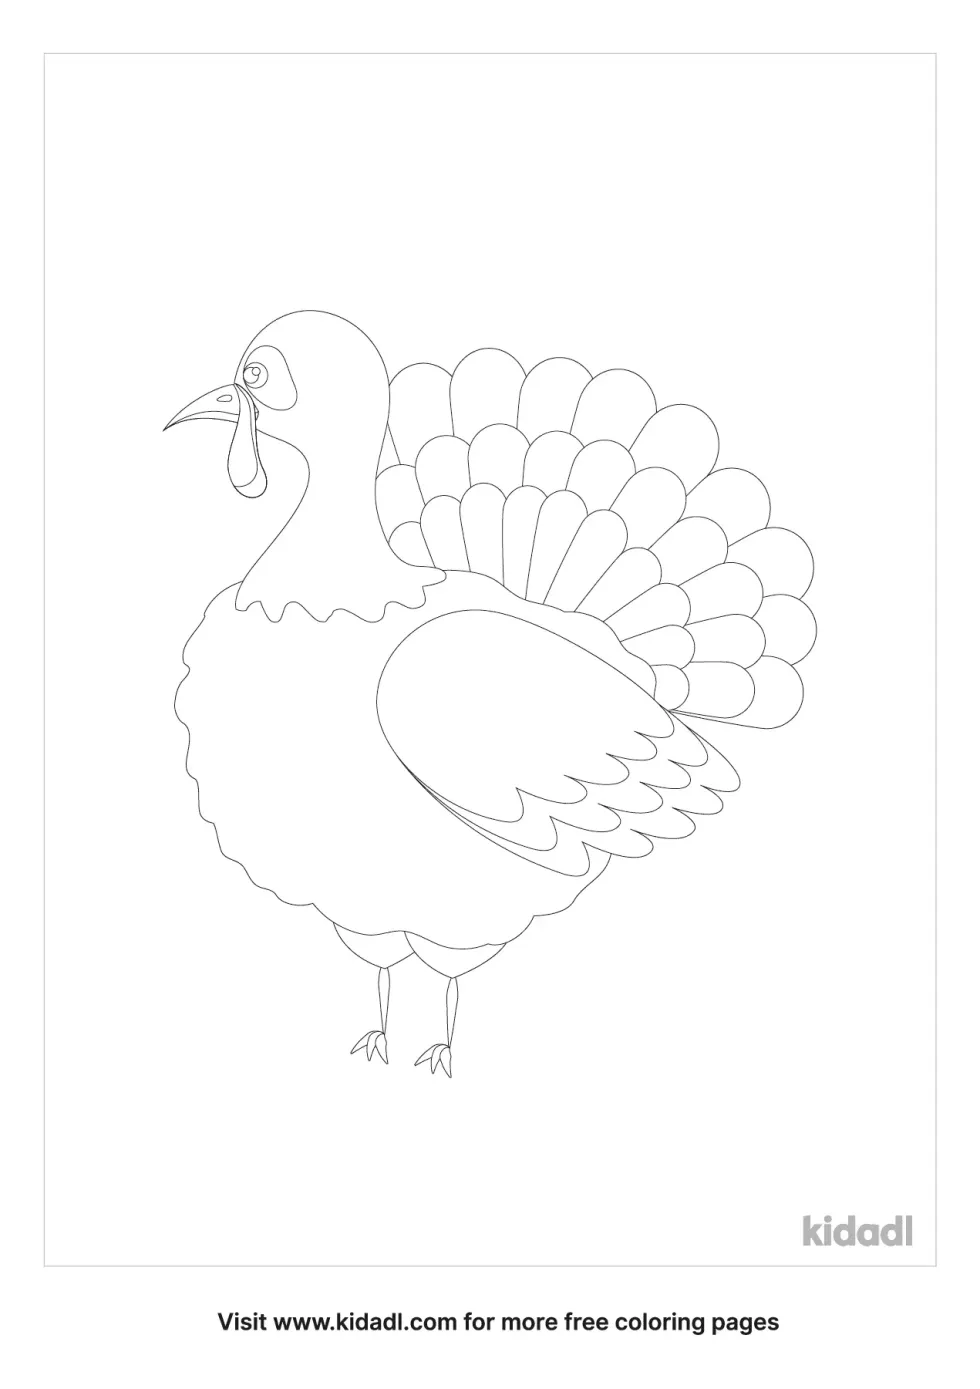 Turkey Detailed Coloring Page